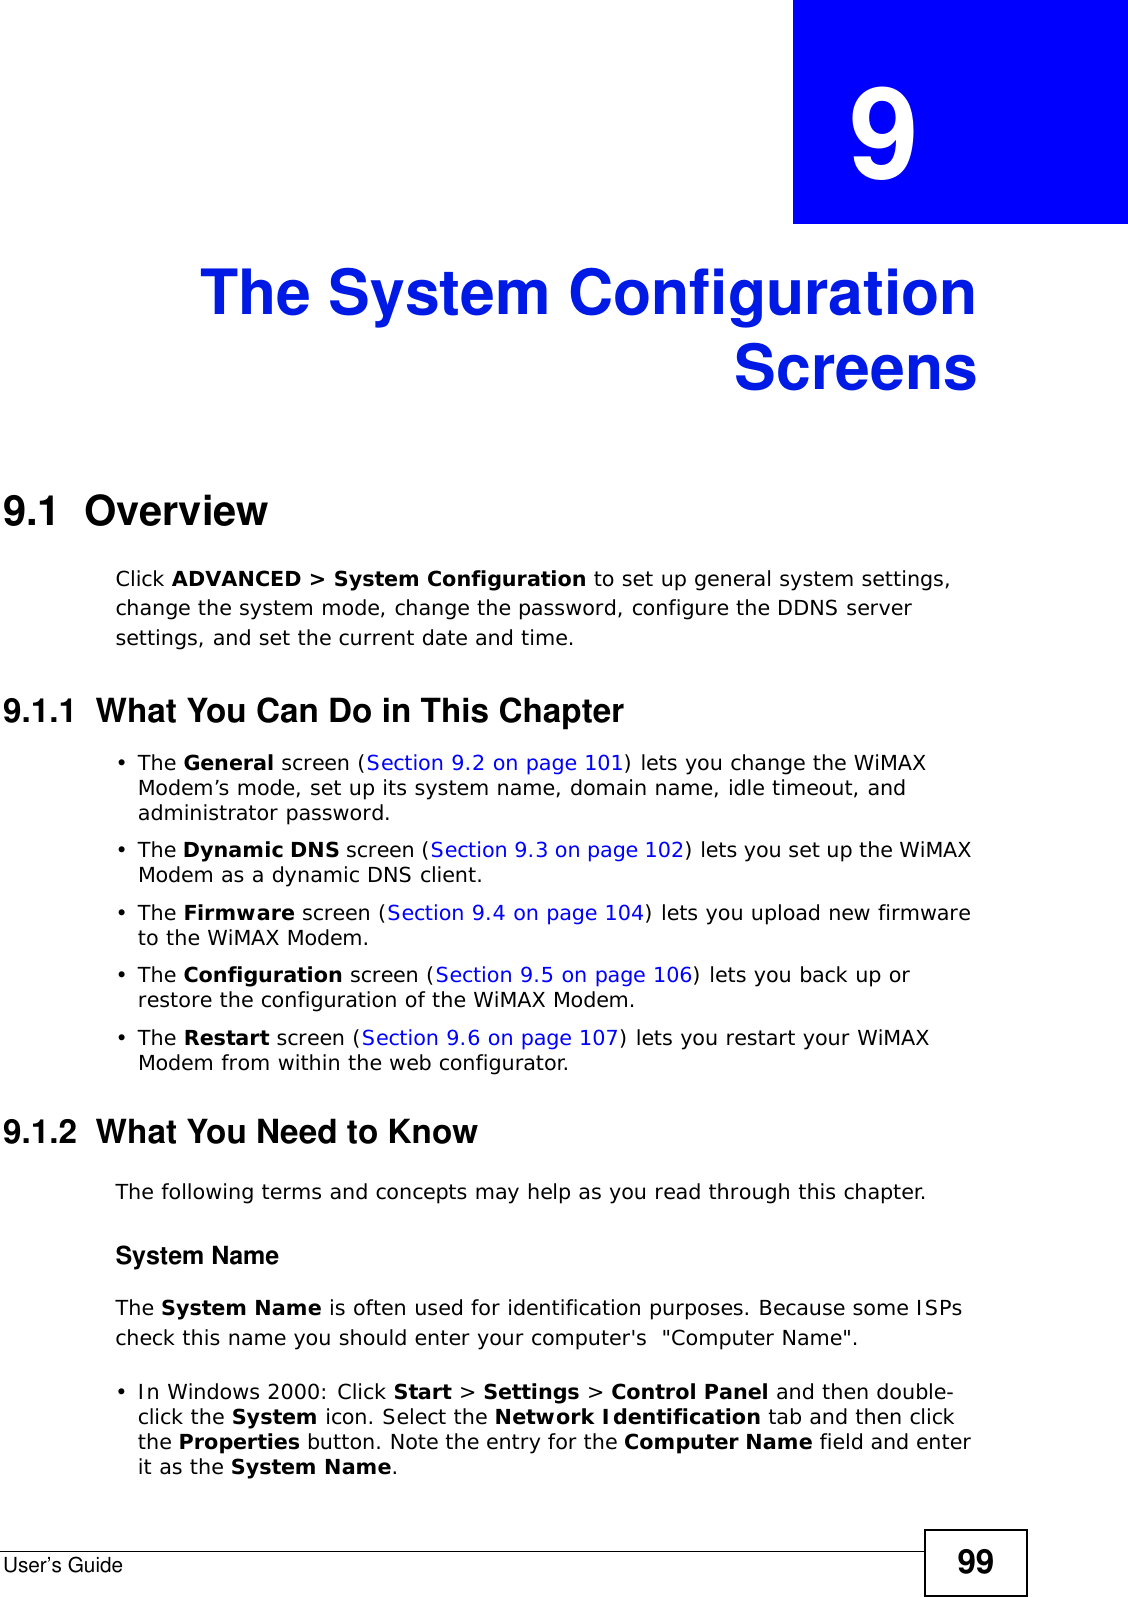 User’s Guide 99CHAPTER  9 The System ConfigurationScreens9.1  OverviewClick ADVANCED &gt; System Configuration to set up general system settings, change the system mode, change the password, configure the DDNS server settings, and set the current date and time.9.1.1  What You Can Do in This Chapter•The General screen (Section 9.2 on page 101) lets you change the WiMAX Modem’s mode, set up its system name, domain name, idle timeout, and administrator password.•The Dynamic DNS screen (Section 9.3 on page 102) lets you set up the WiMAX Modem as a dynamic DNS client.•The Firmware screen (Section 9.4 on page 104) lets you upload new firmware to the WiMAX Modem.•The Configuration screen (Section 9.5 on page 106) lets you back up or restore the configuration of the WiMAX Modem.•The Restart screen (Section 9.6 on page 107) lets you restart your WiMAX Modem from within the web configurator.9.1.2  What You Need to KnowThe following terms and concepts may help as you read through this chapter.System NameThe System Name is often used for identification purposes. Because some ISPs check this name you should enter your computer&apos;s  &quot;Computer Name&quot;. • In Windows 2000: Click Start &gt; Settings &gt; Control Panel and then double-click the System icon. Select the Network Identification tab and then click the Properties button. Note the entry for the Computer Name field and enter it as the System Name.